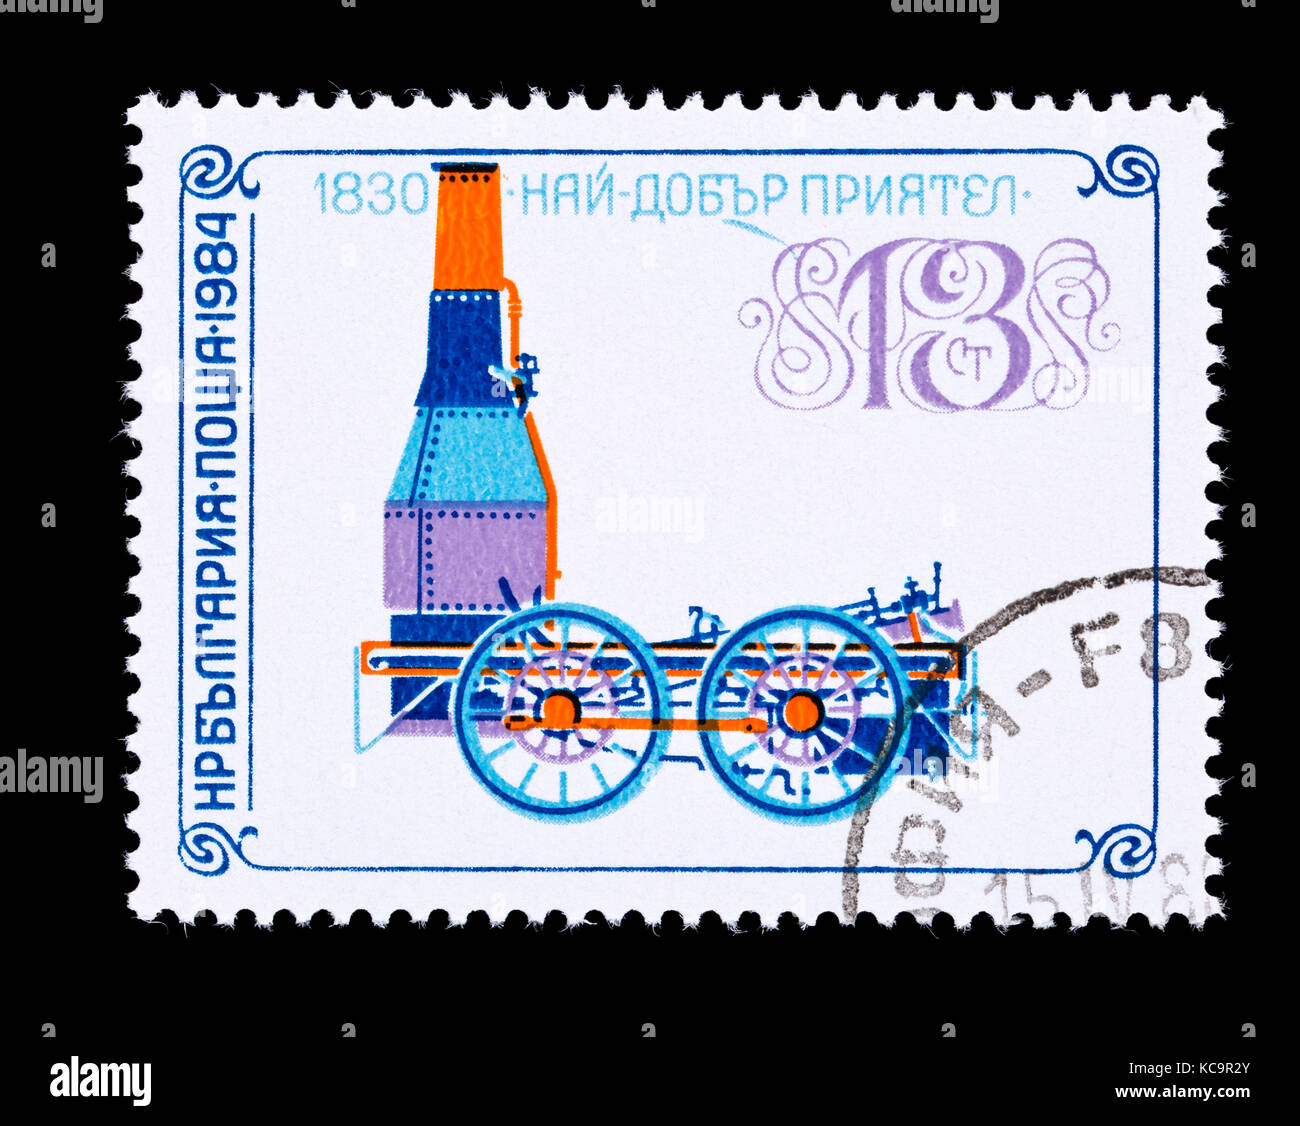 Postage stamp from Bulgaria depicting the steam locomotive Best Friend of Charleston, United Sates, 1830. Stock Photo